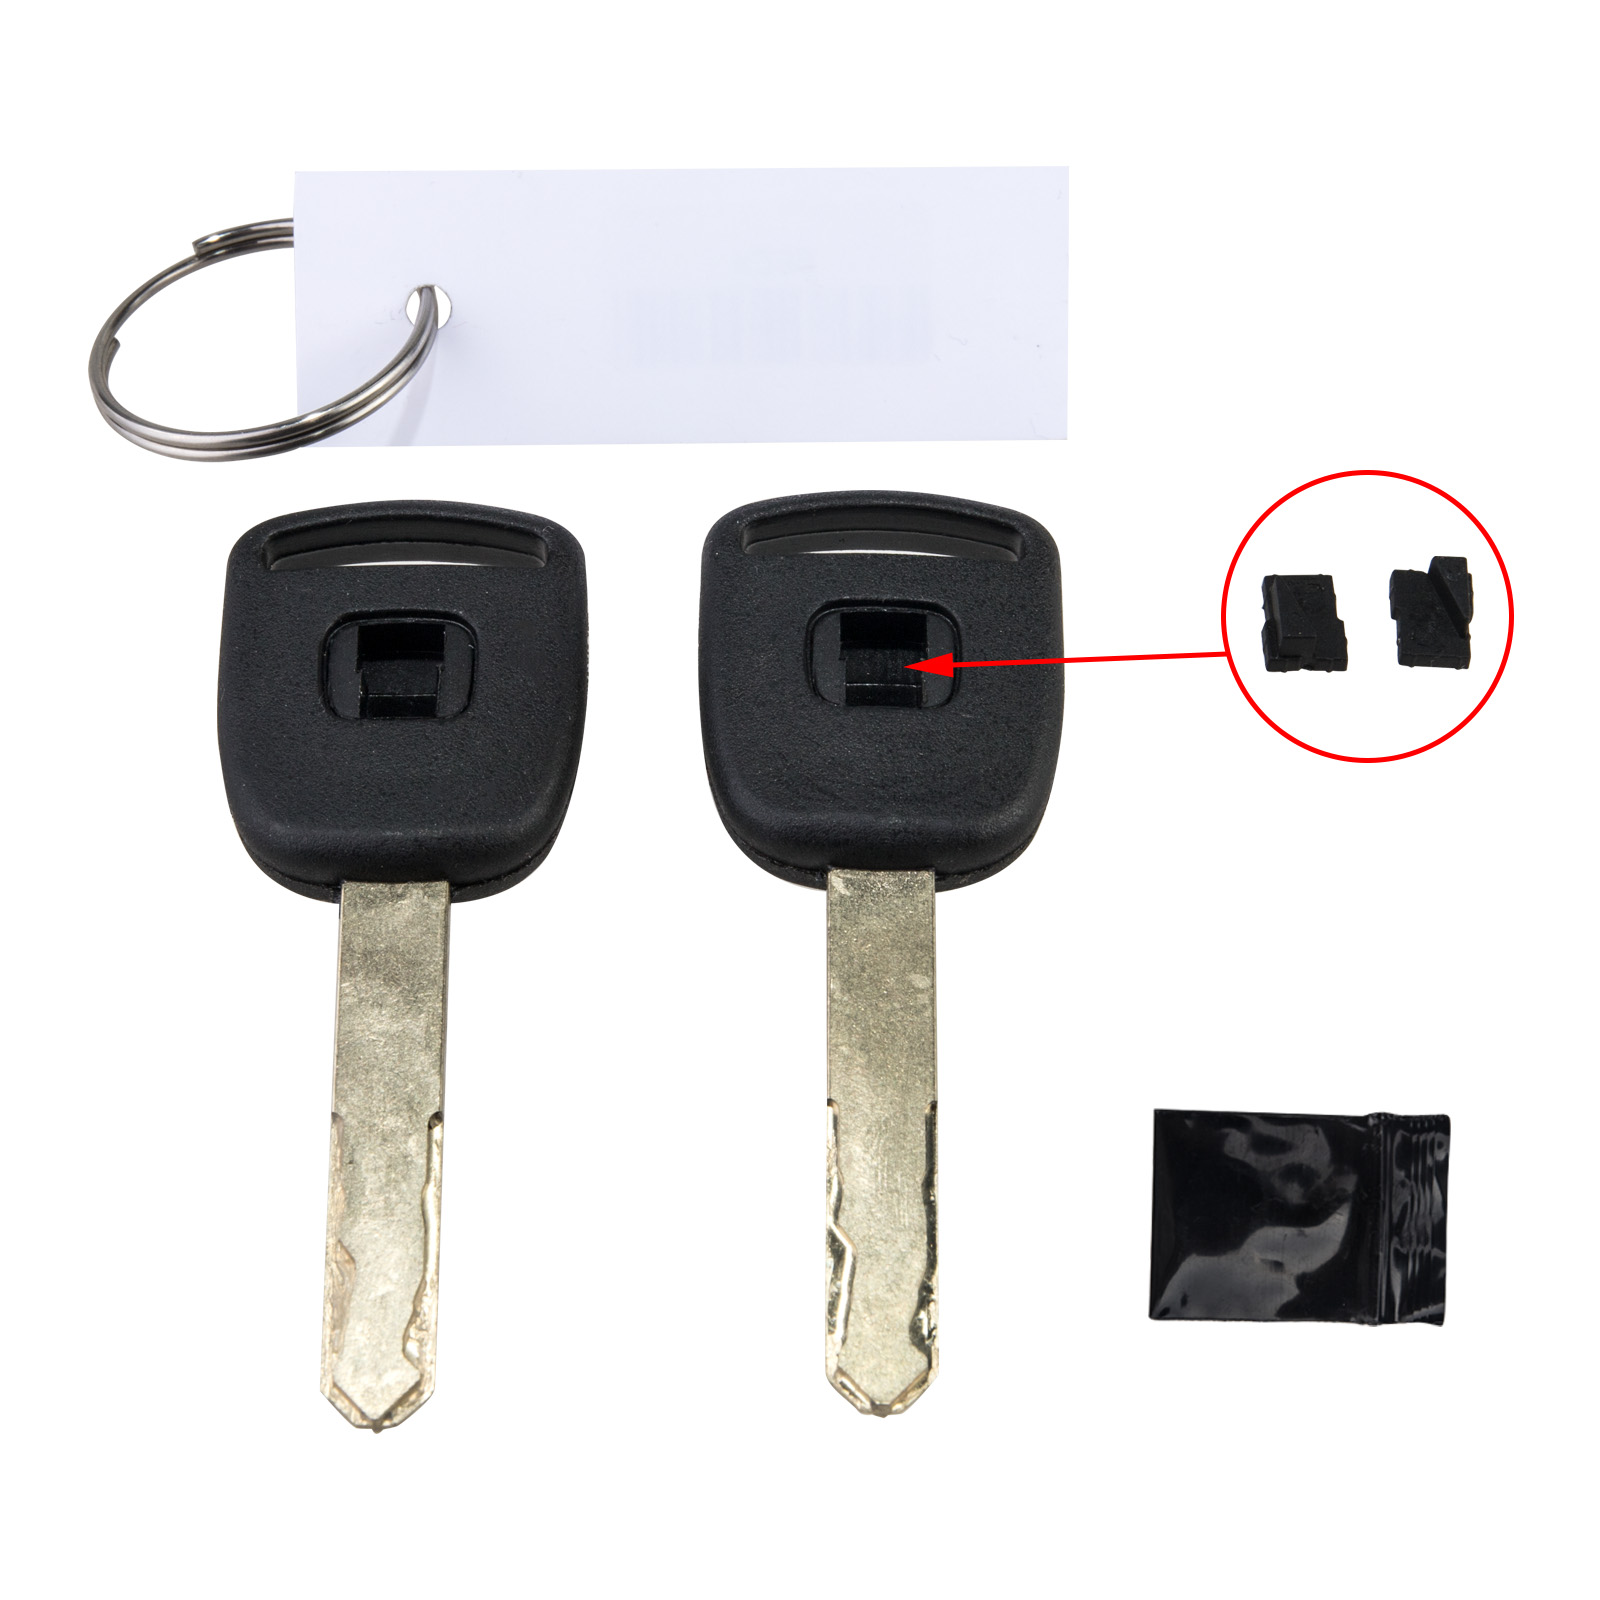 3mirrors Ignition Switch Lock Cylinder Compatible with Honda Accord Civic  CR-V CR-Z Element Fit Odyssey S2000 Acura 06351-TE0-A11 Fits select:  2007-2013 ACURA MDX, 2007-2014 ACURA TL